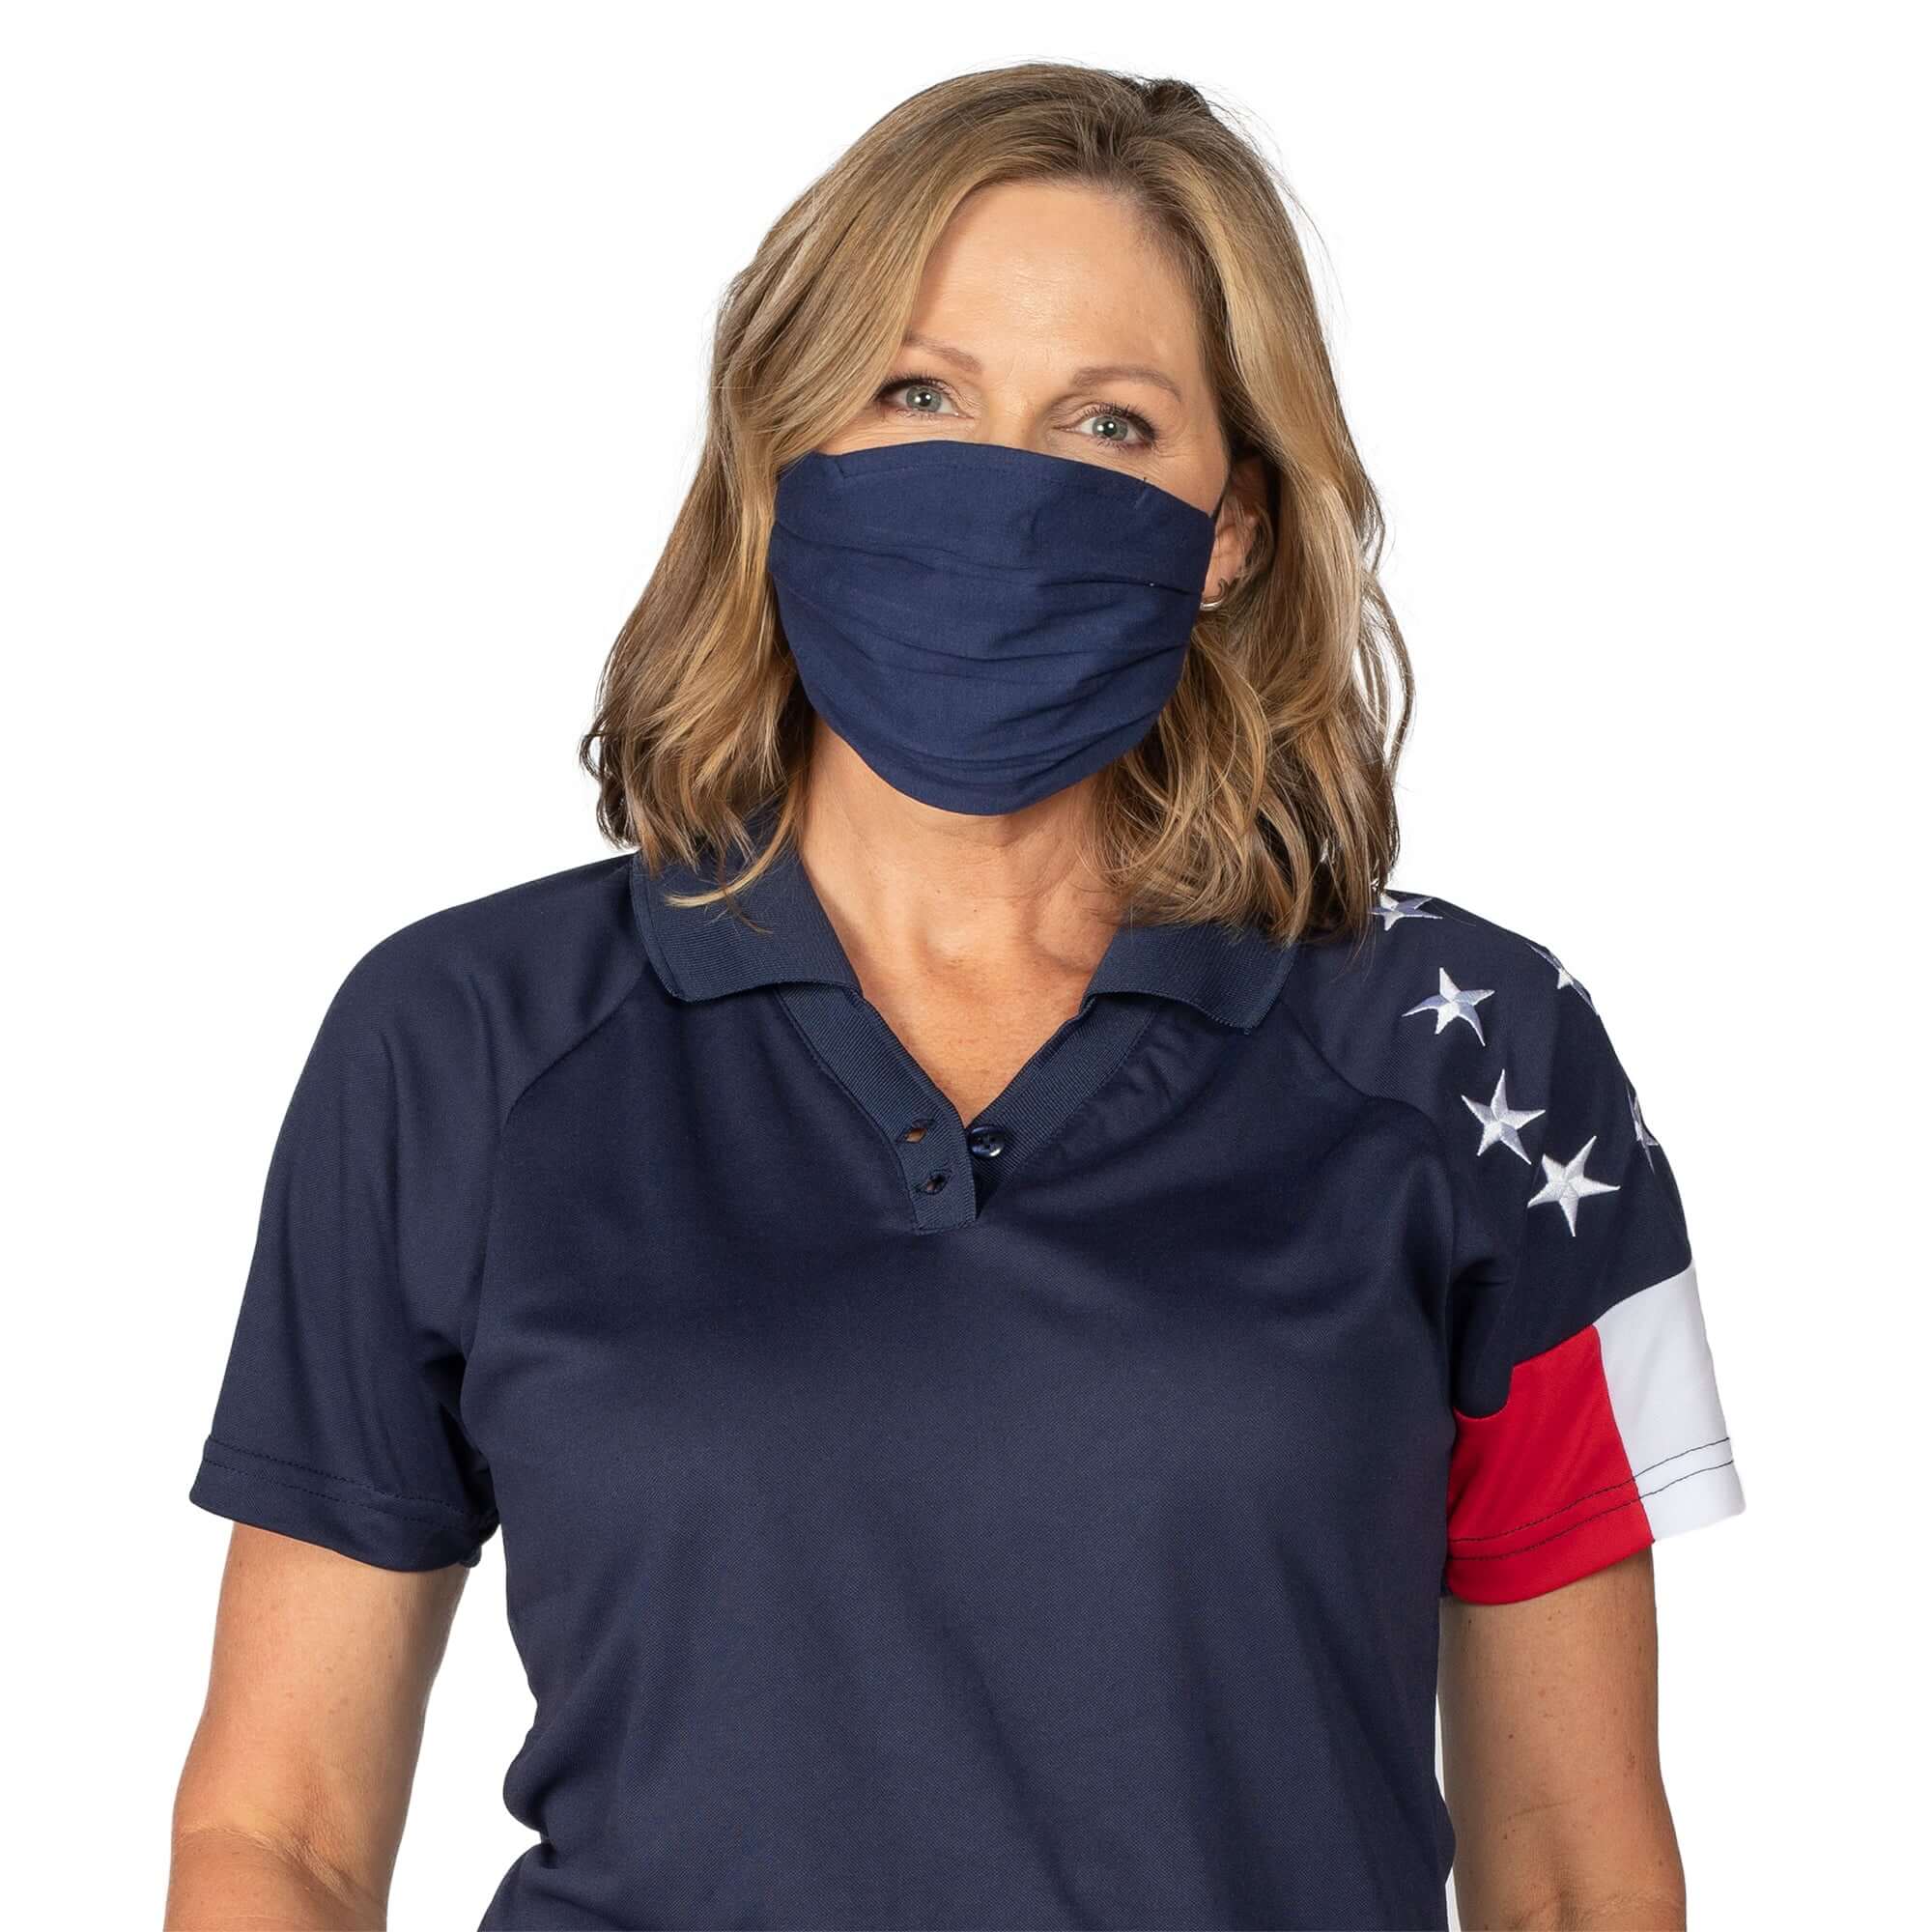 Patriotic Facemask 2-Pack Combo - the flag shirt